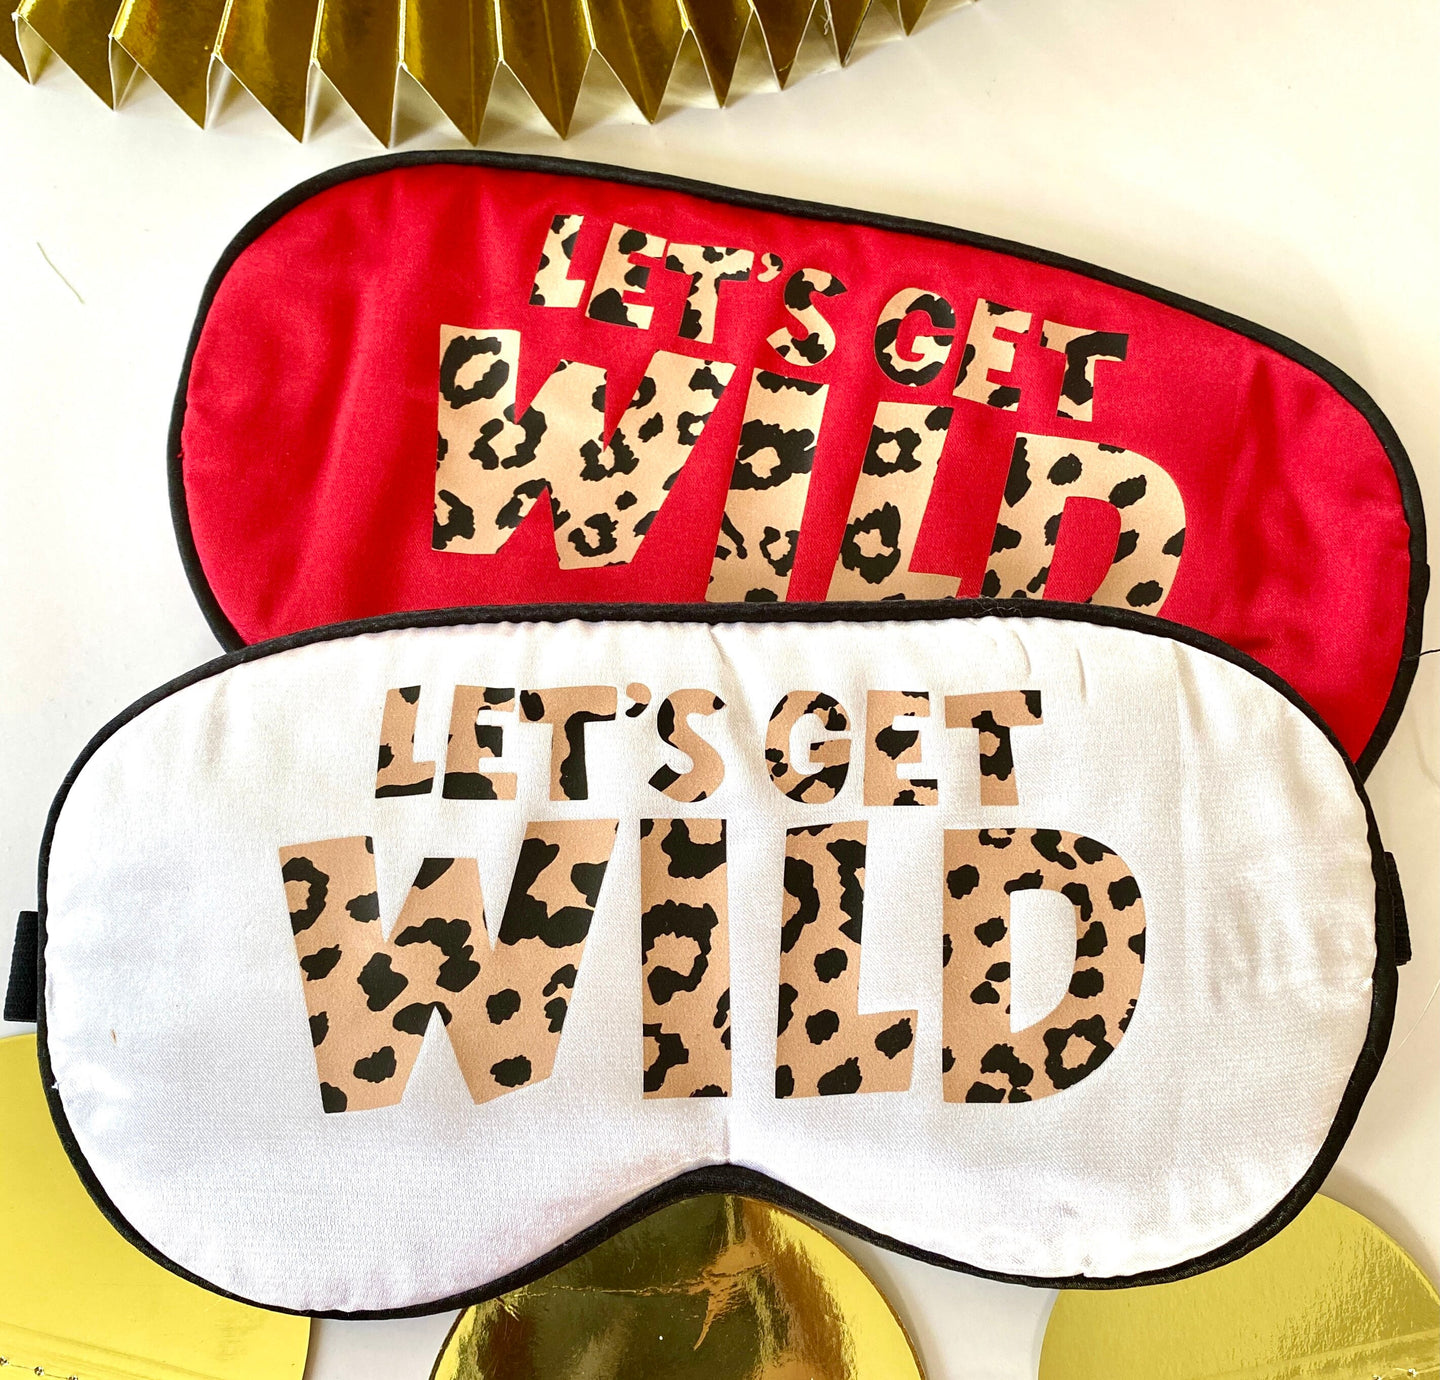 Let's Get WILD Sleep Mask! Cheetah Bachelorette or Birthday party FAVORS. Leopard theme Bachelorette!  Bachelorette Party! Get WildFavors!